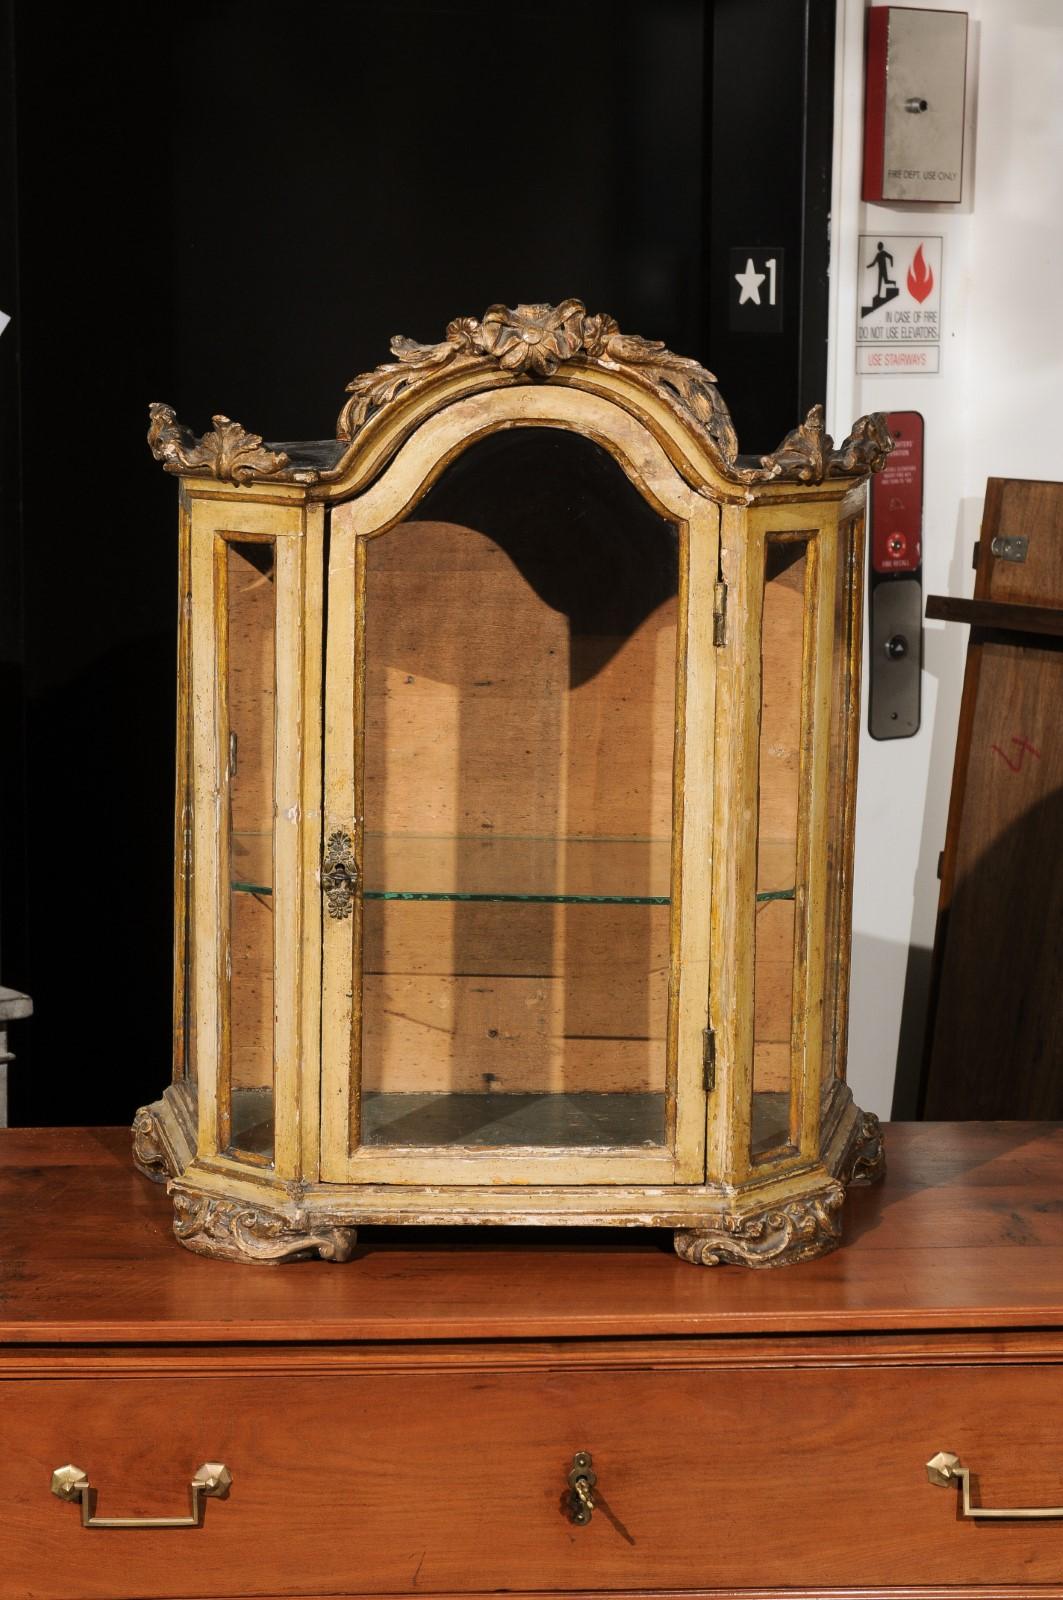 A petite Venetian 18th century period Rococo painted wood vitrine with carved crest and glass door. Created in Italy during the Rococo period, this Italian table top vitrine features an exquisite ribbon-tied floral carved crest, elegantly resting on